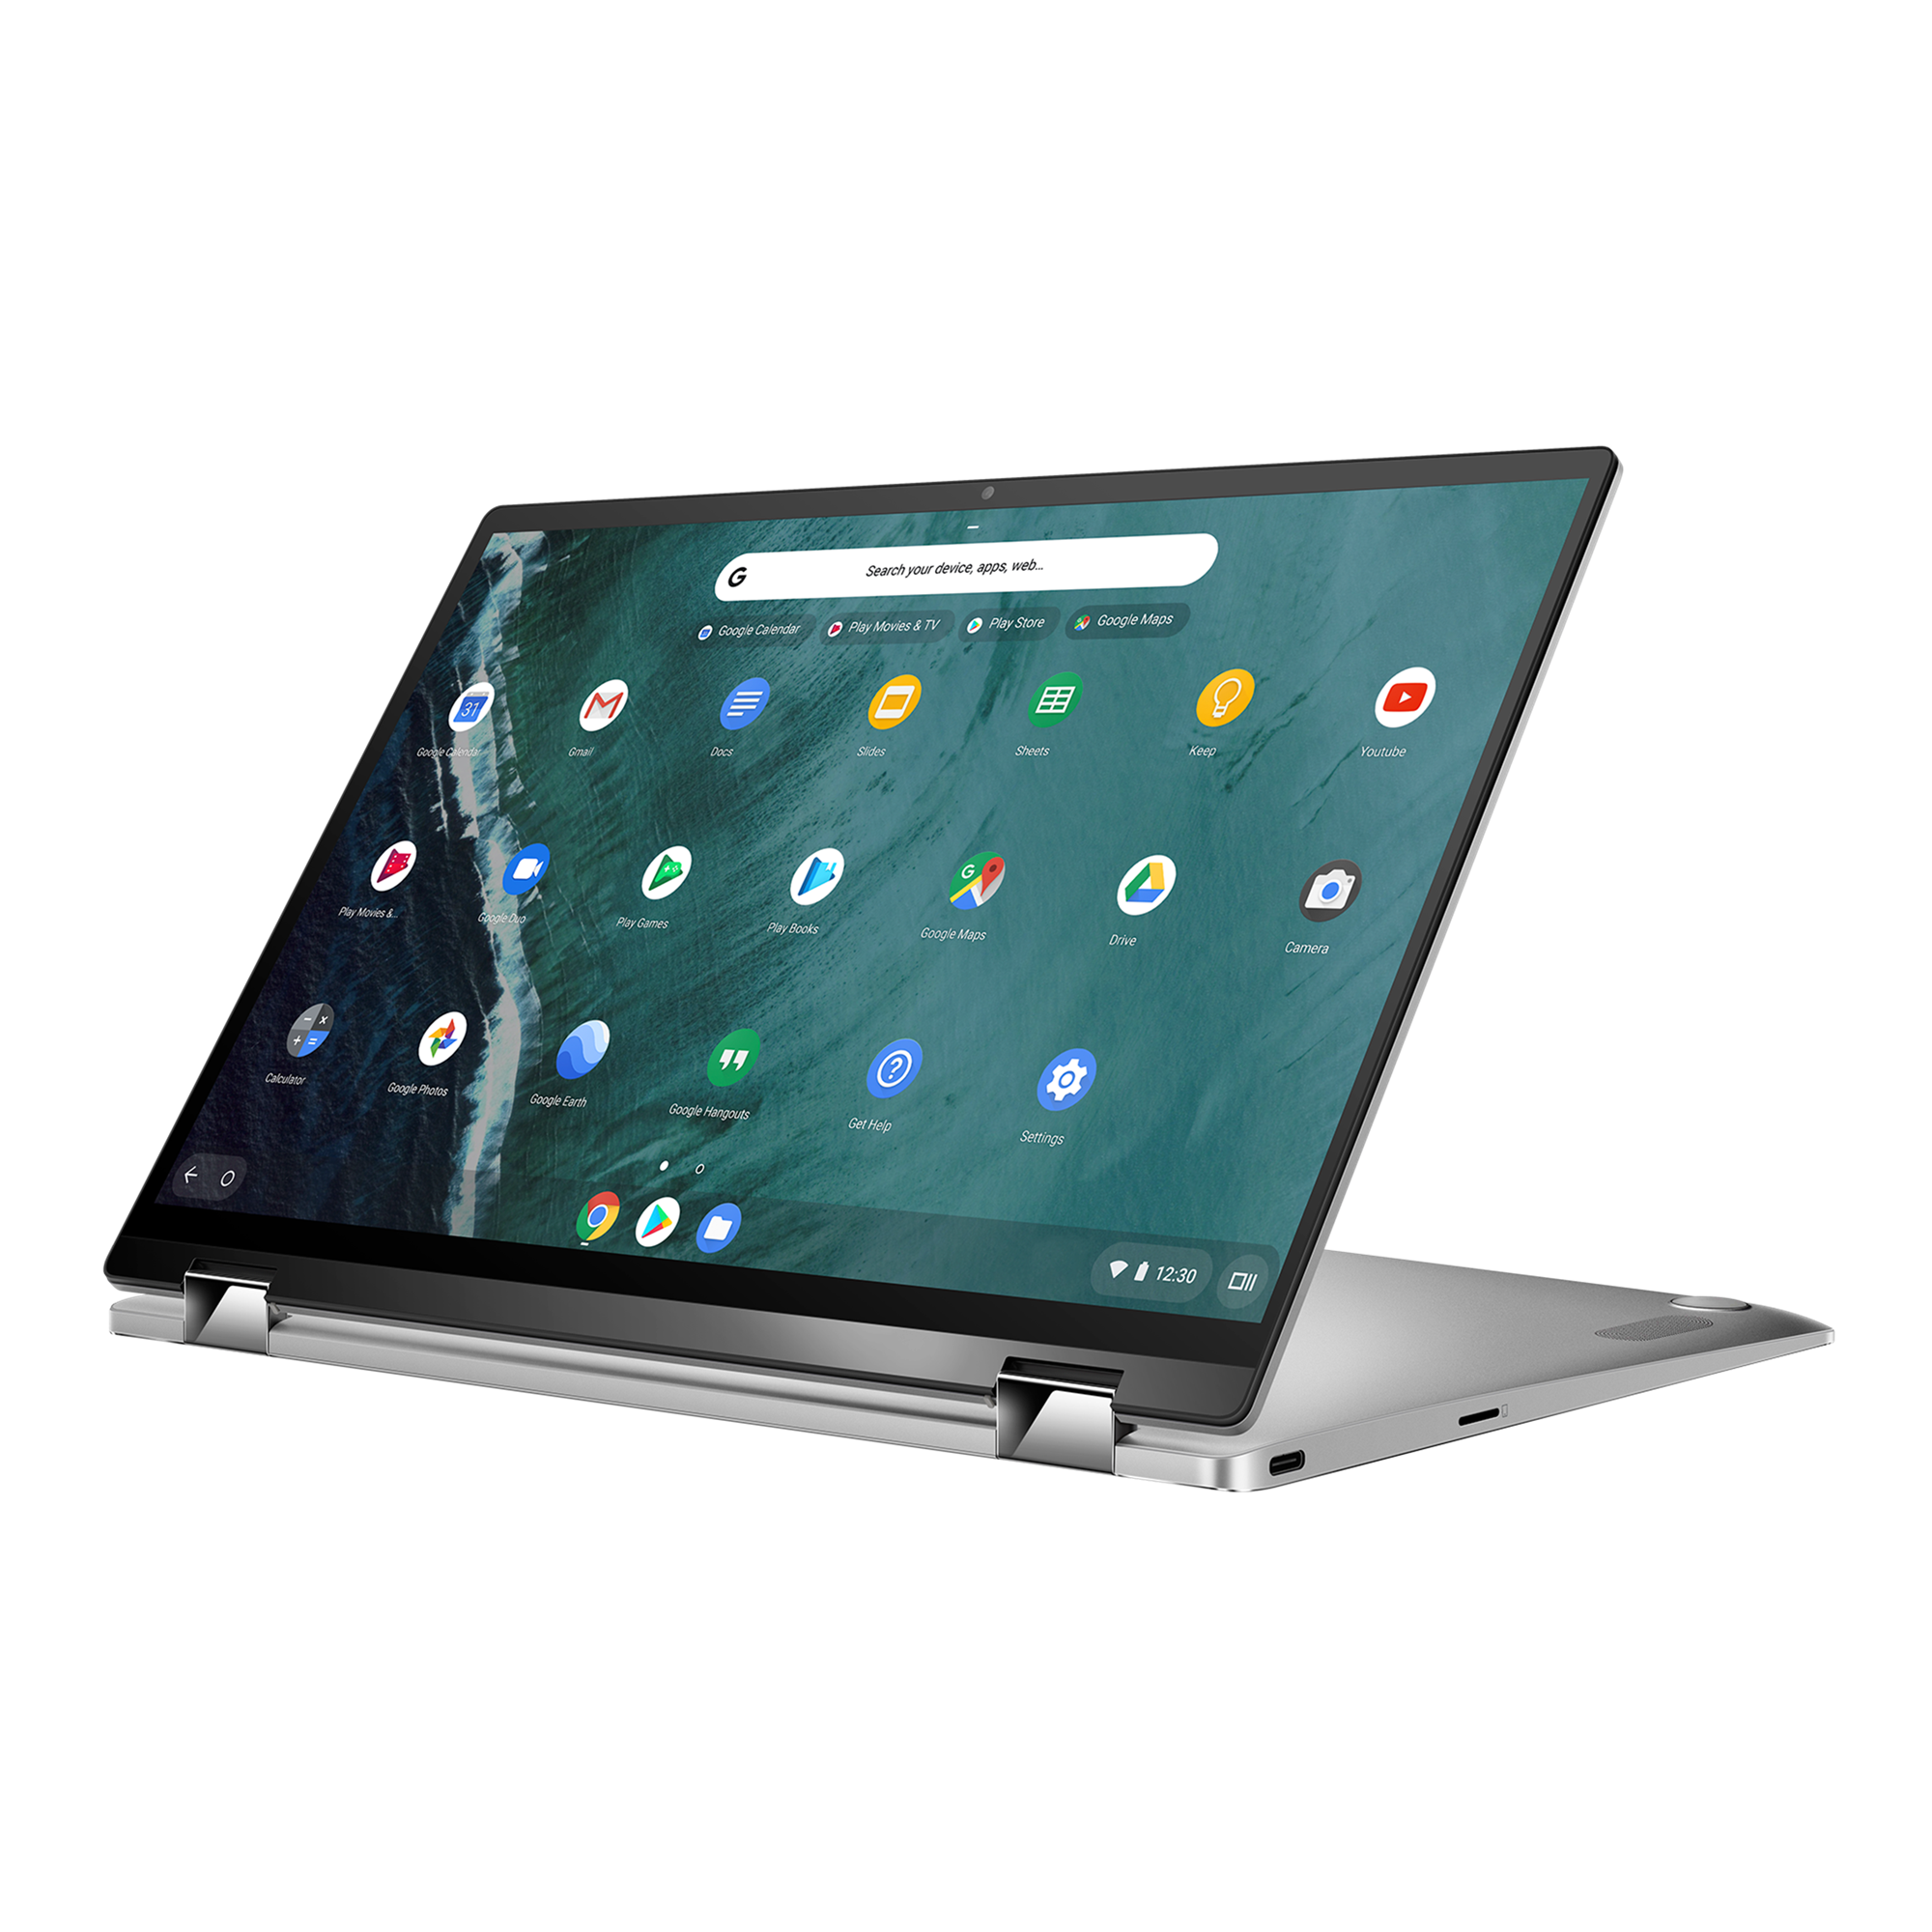 ASUS Chromebook Flip C436｜Laptops For Home｜ASUS USA